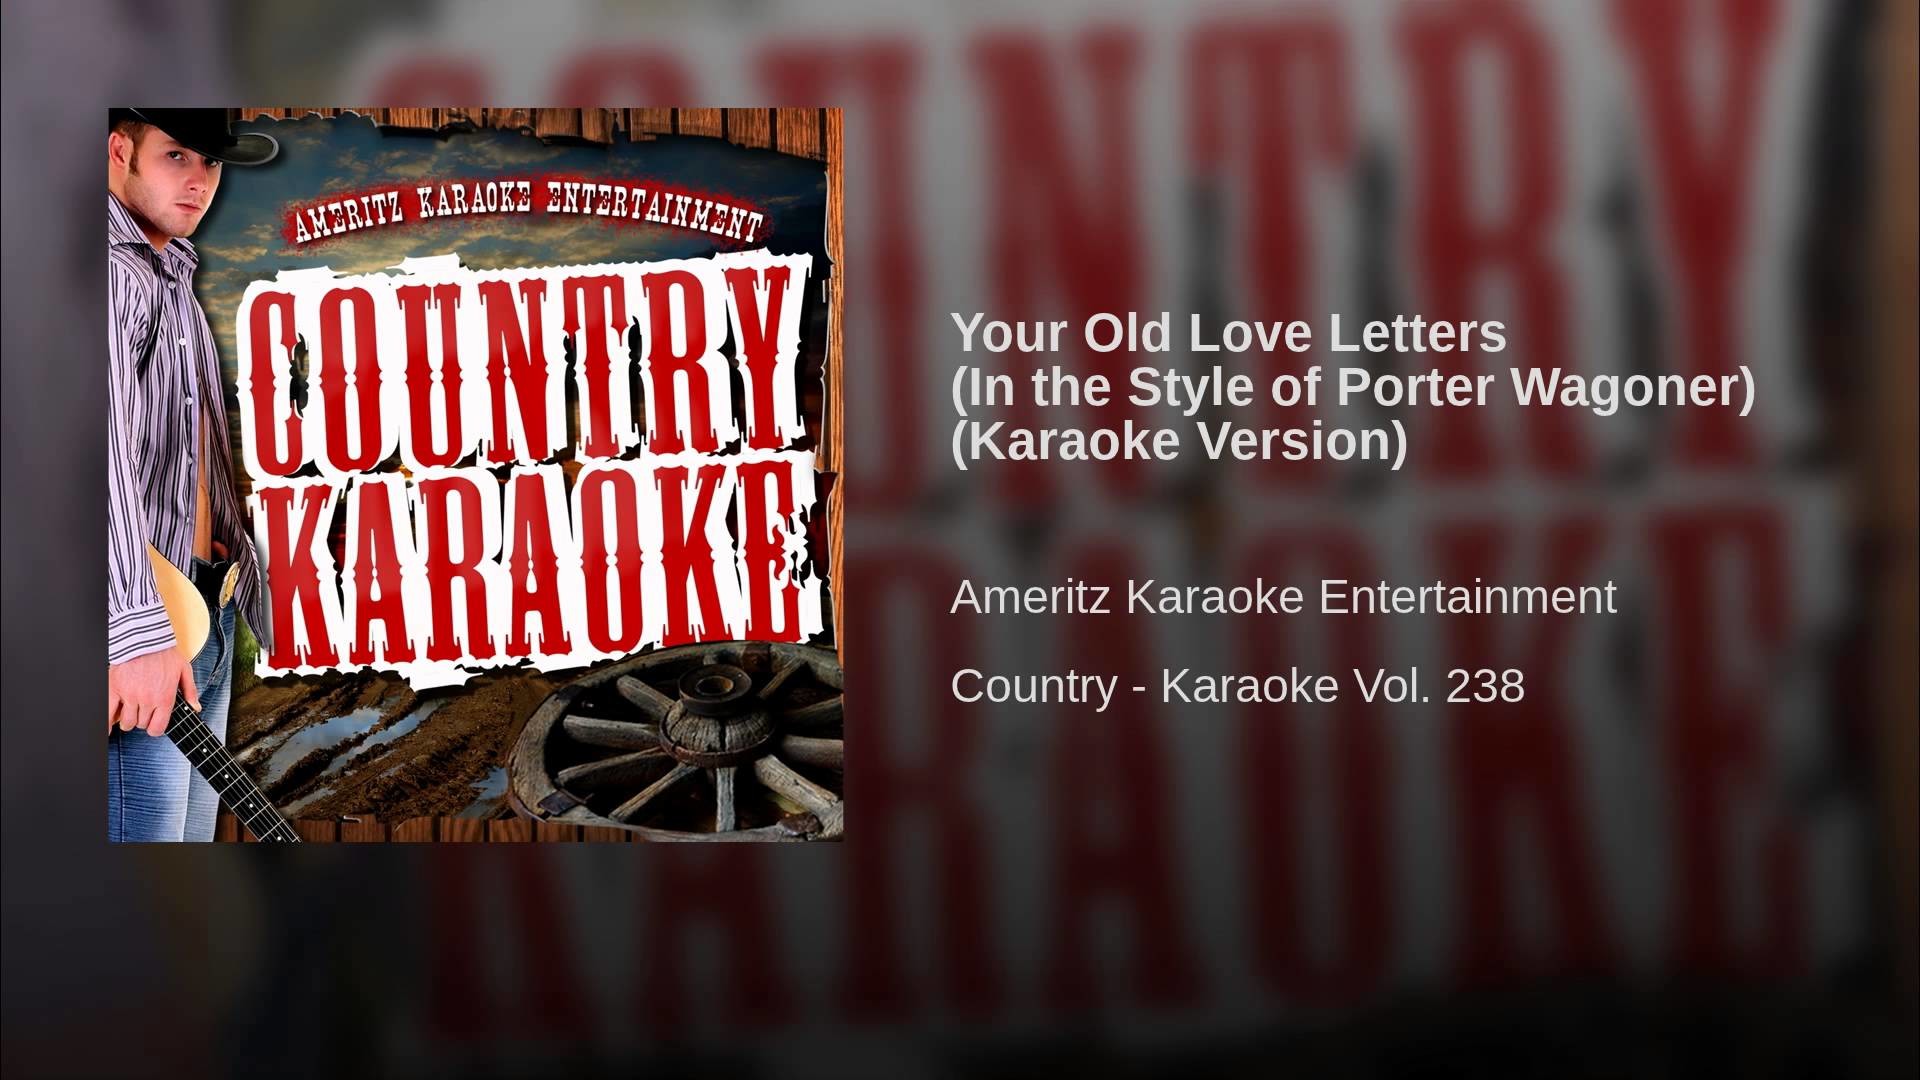 1920x1080 Your Old Love Letters (In the Style of Porter Wagoner) (Karaoke Version)